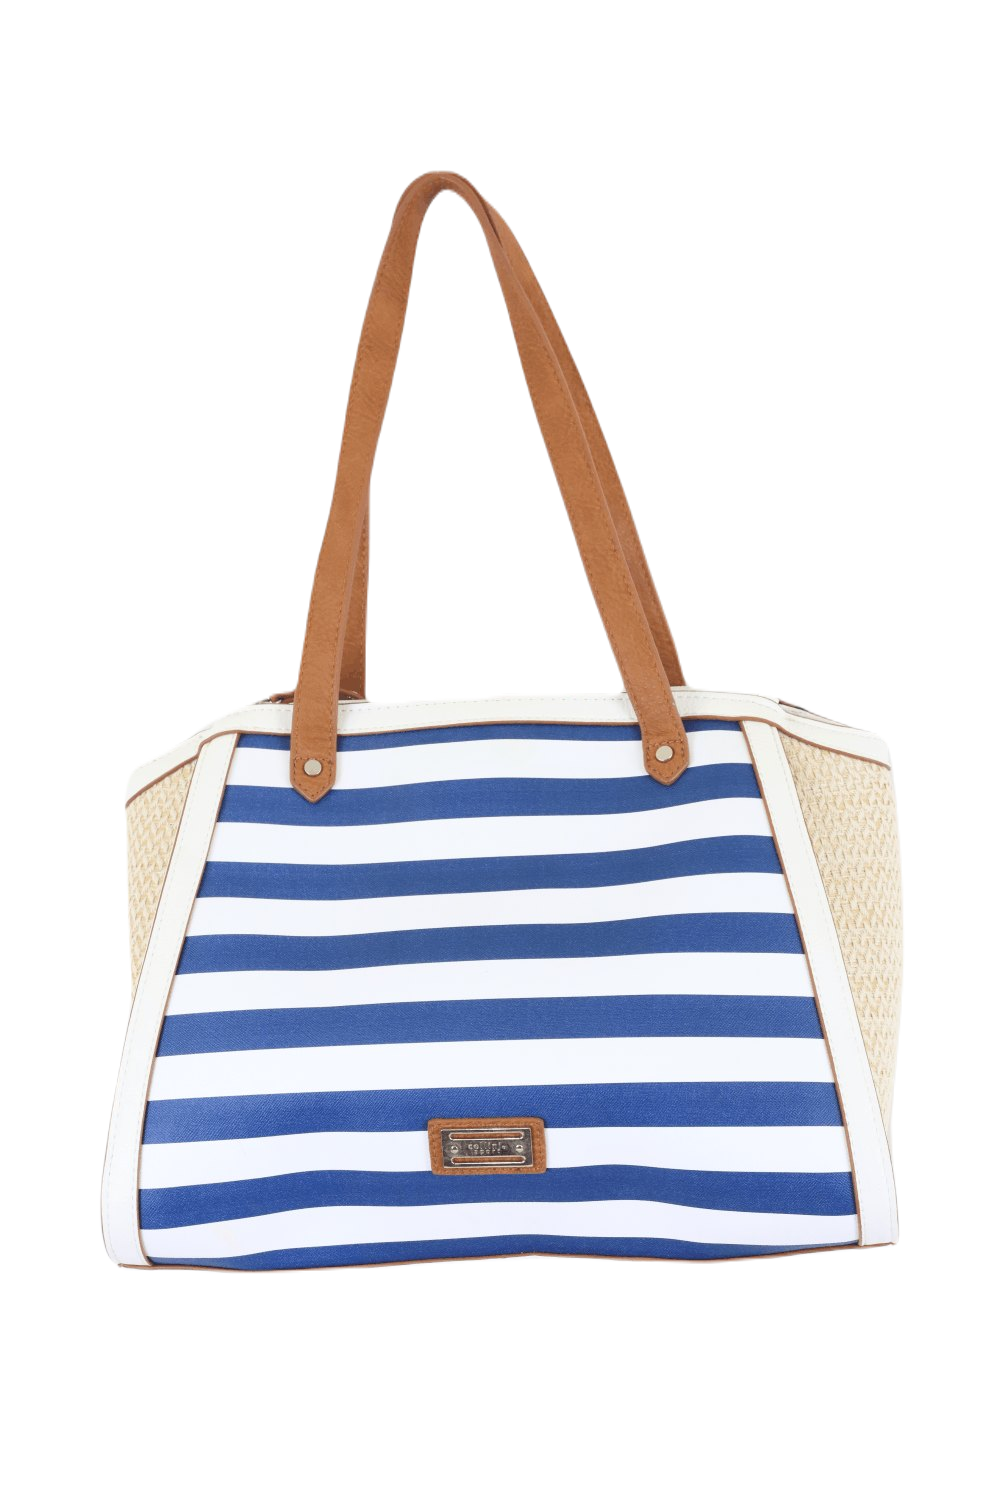 Scoop Women's Striped Woven Beach Bag with Removable Pouch, Blue -  Walmart.com